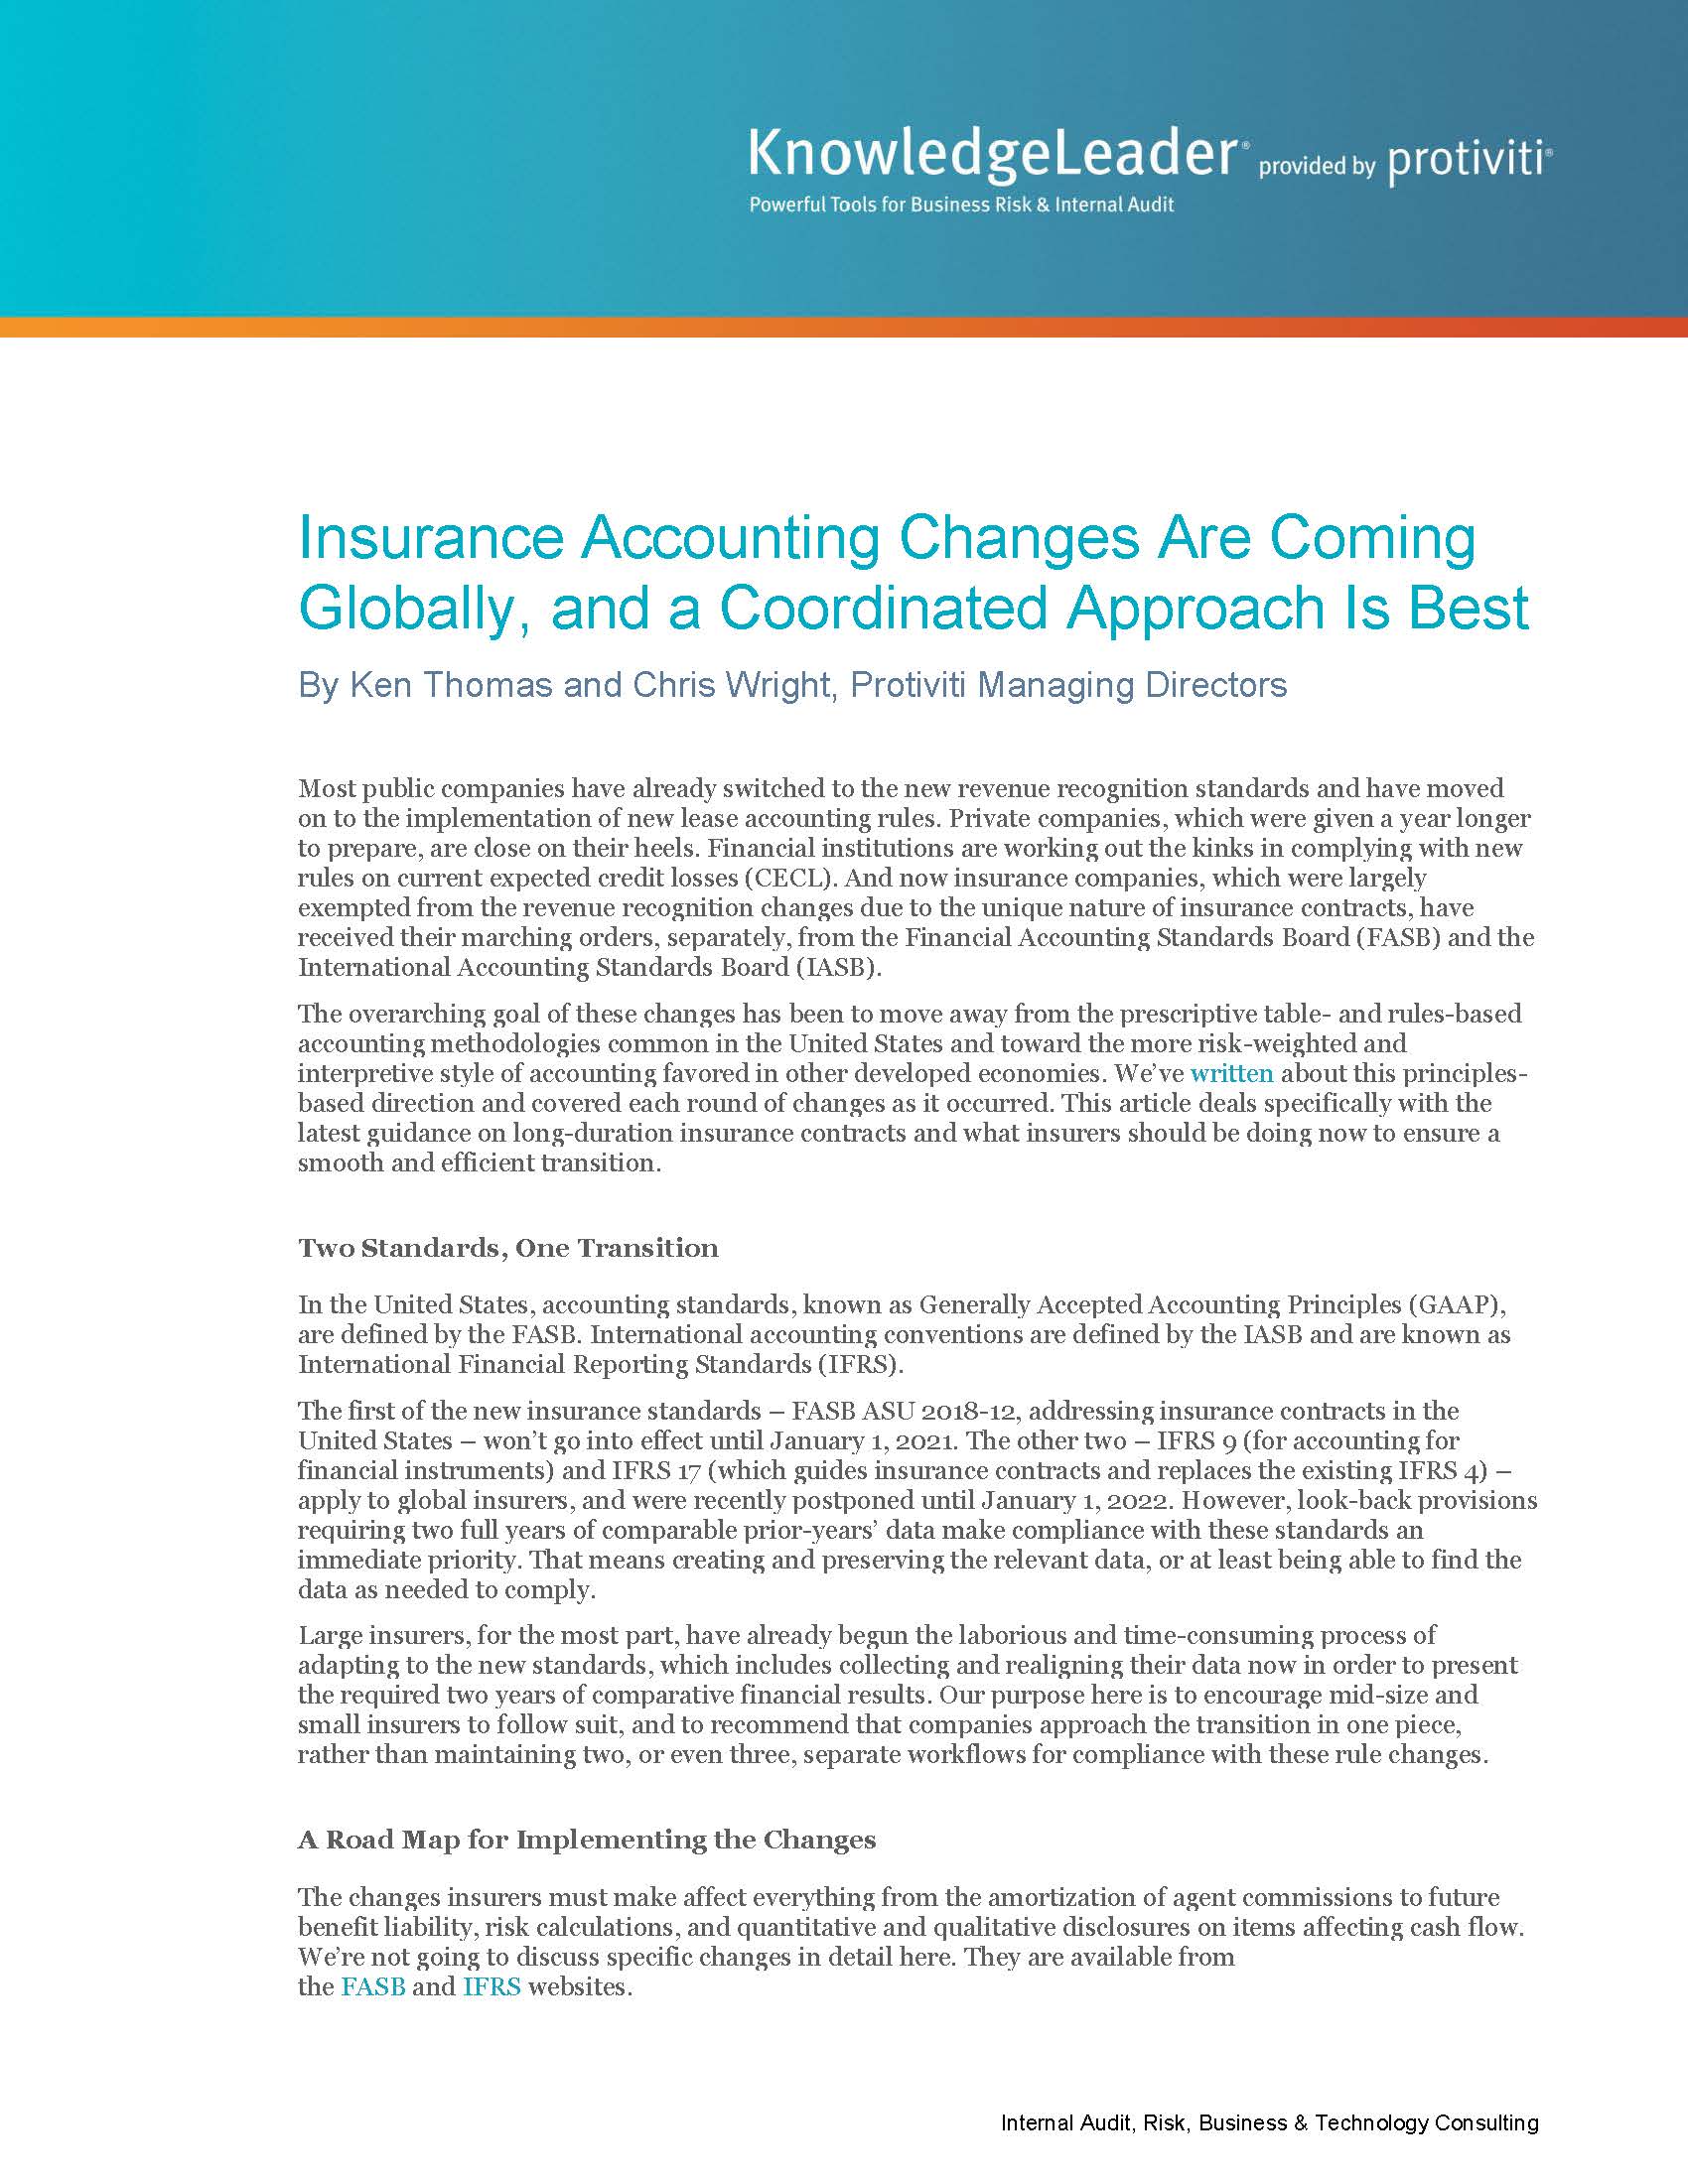 Screenshot of the first page of Insurance Accounting Changes Are Coming Globally, and a Coordinated Approach Is Best